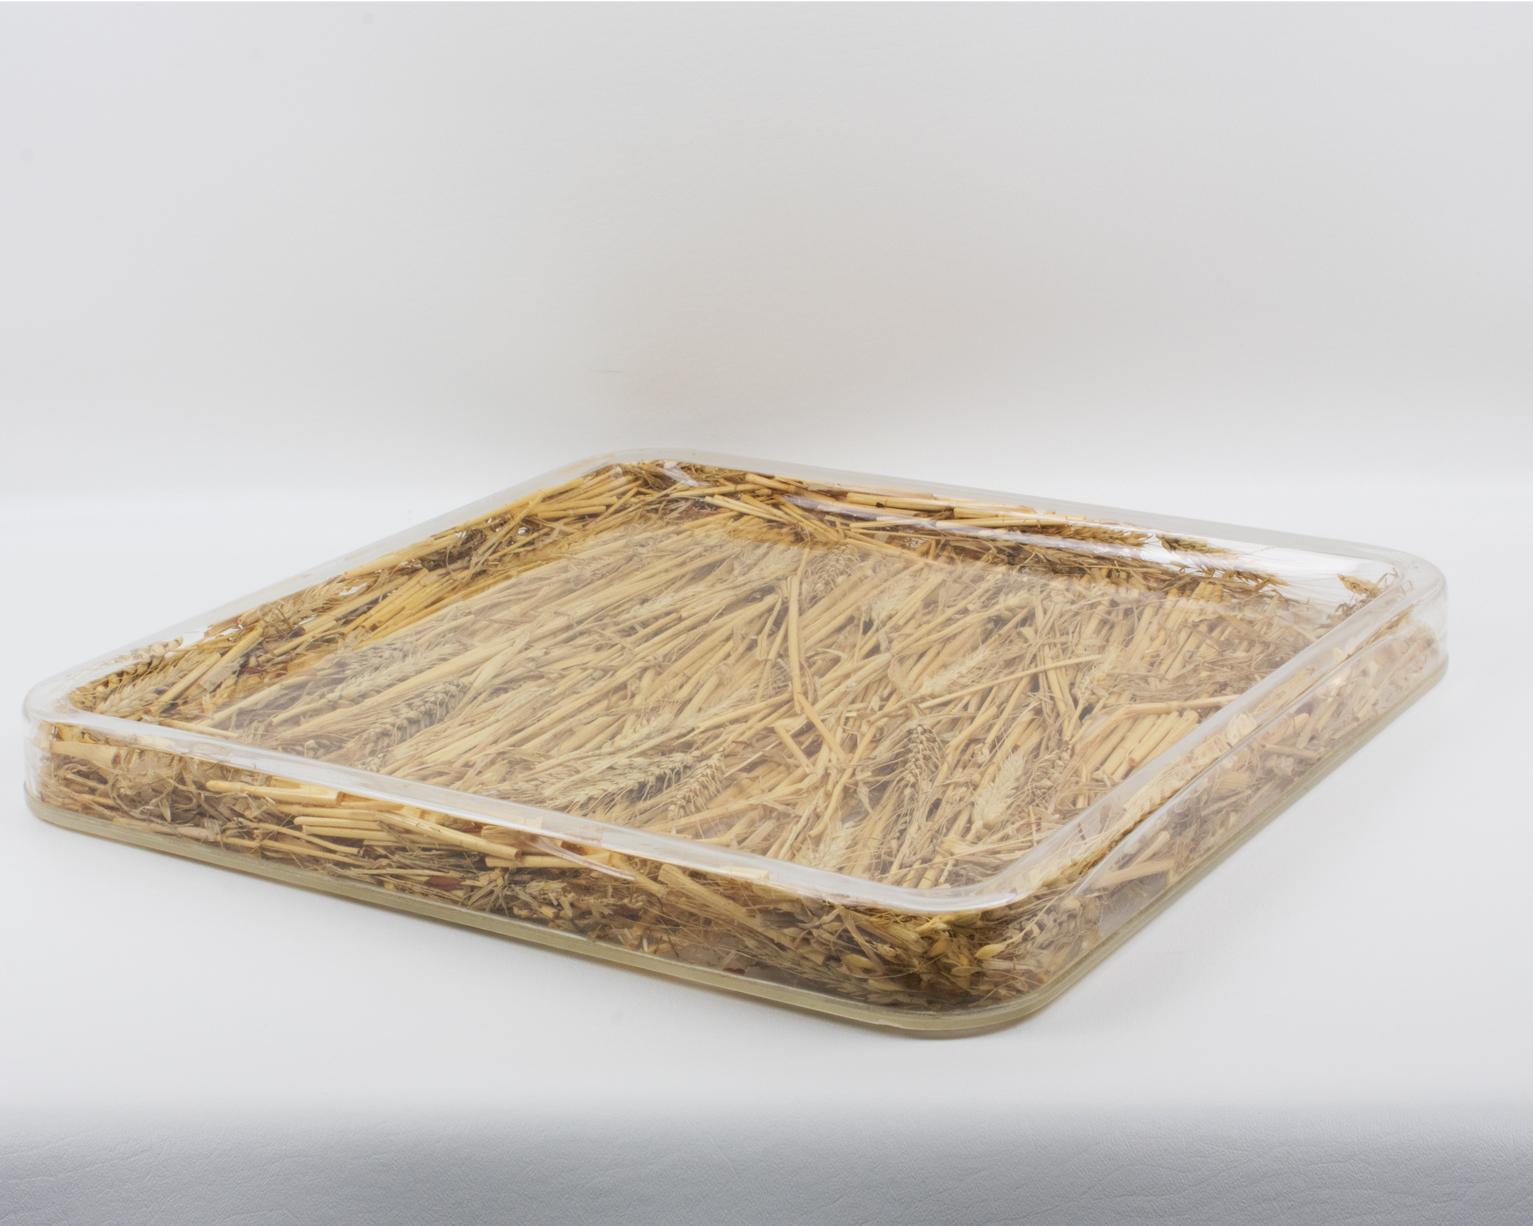 Acrylic Christian Dior Tray Board Platter Lucite and Wheat